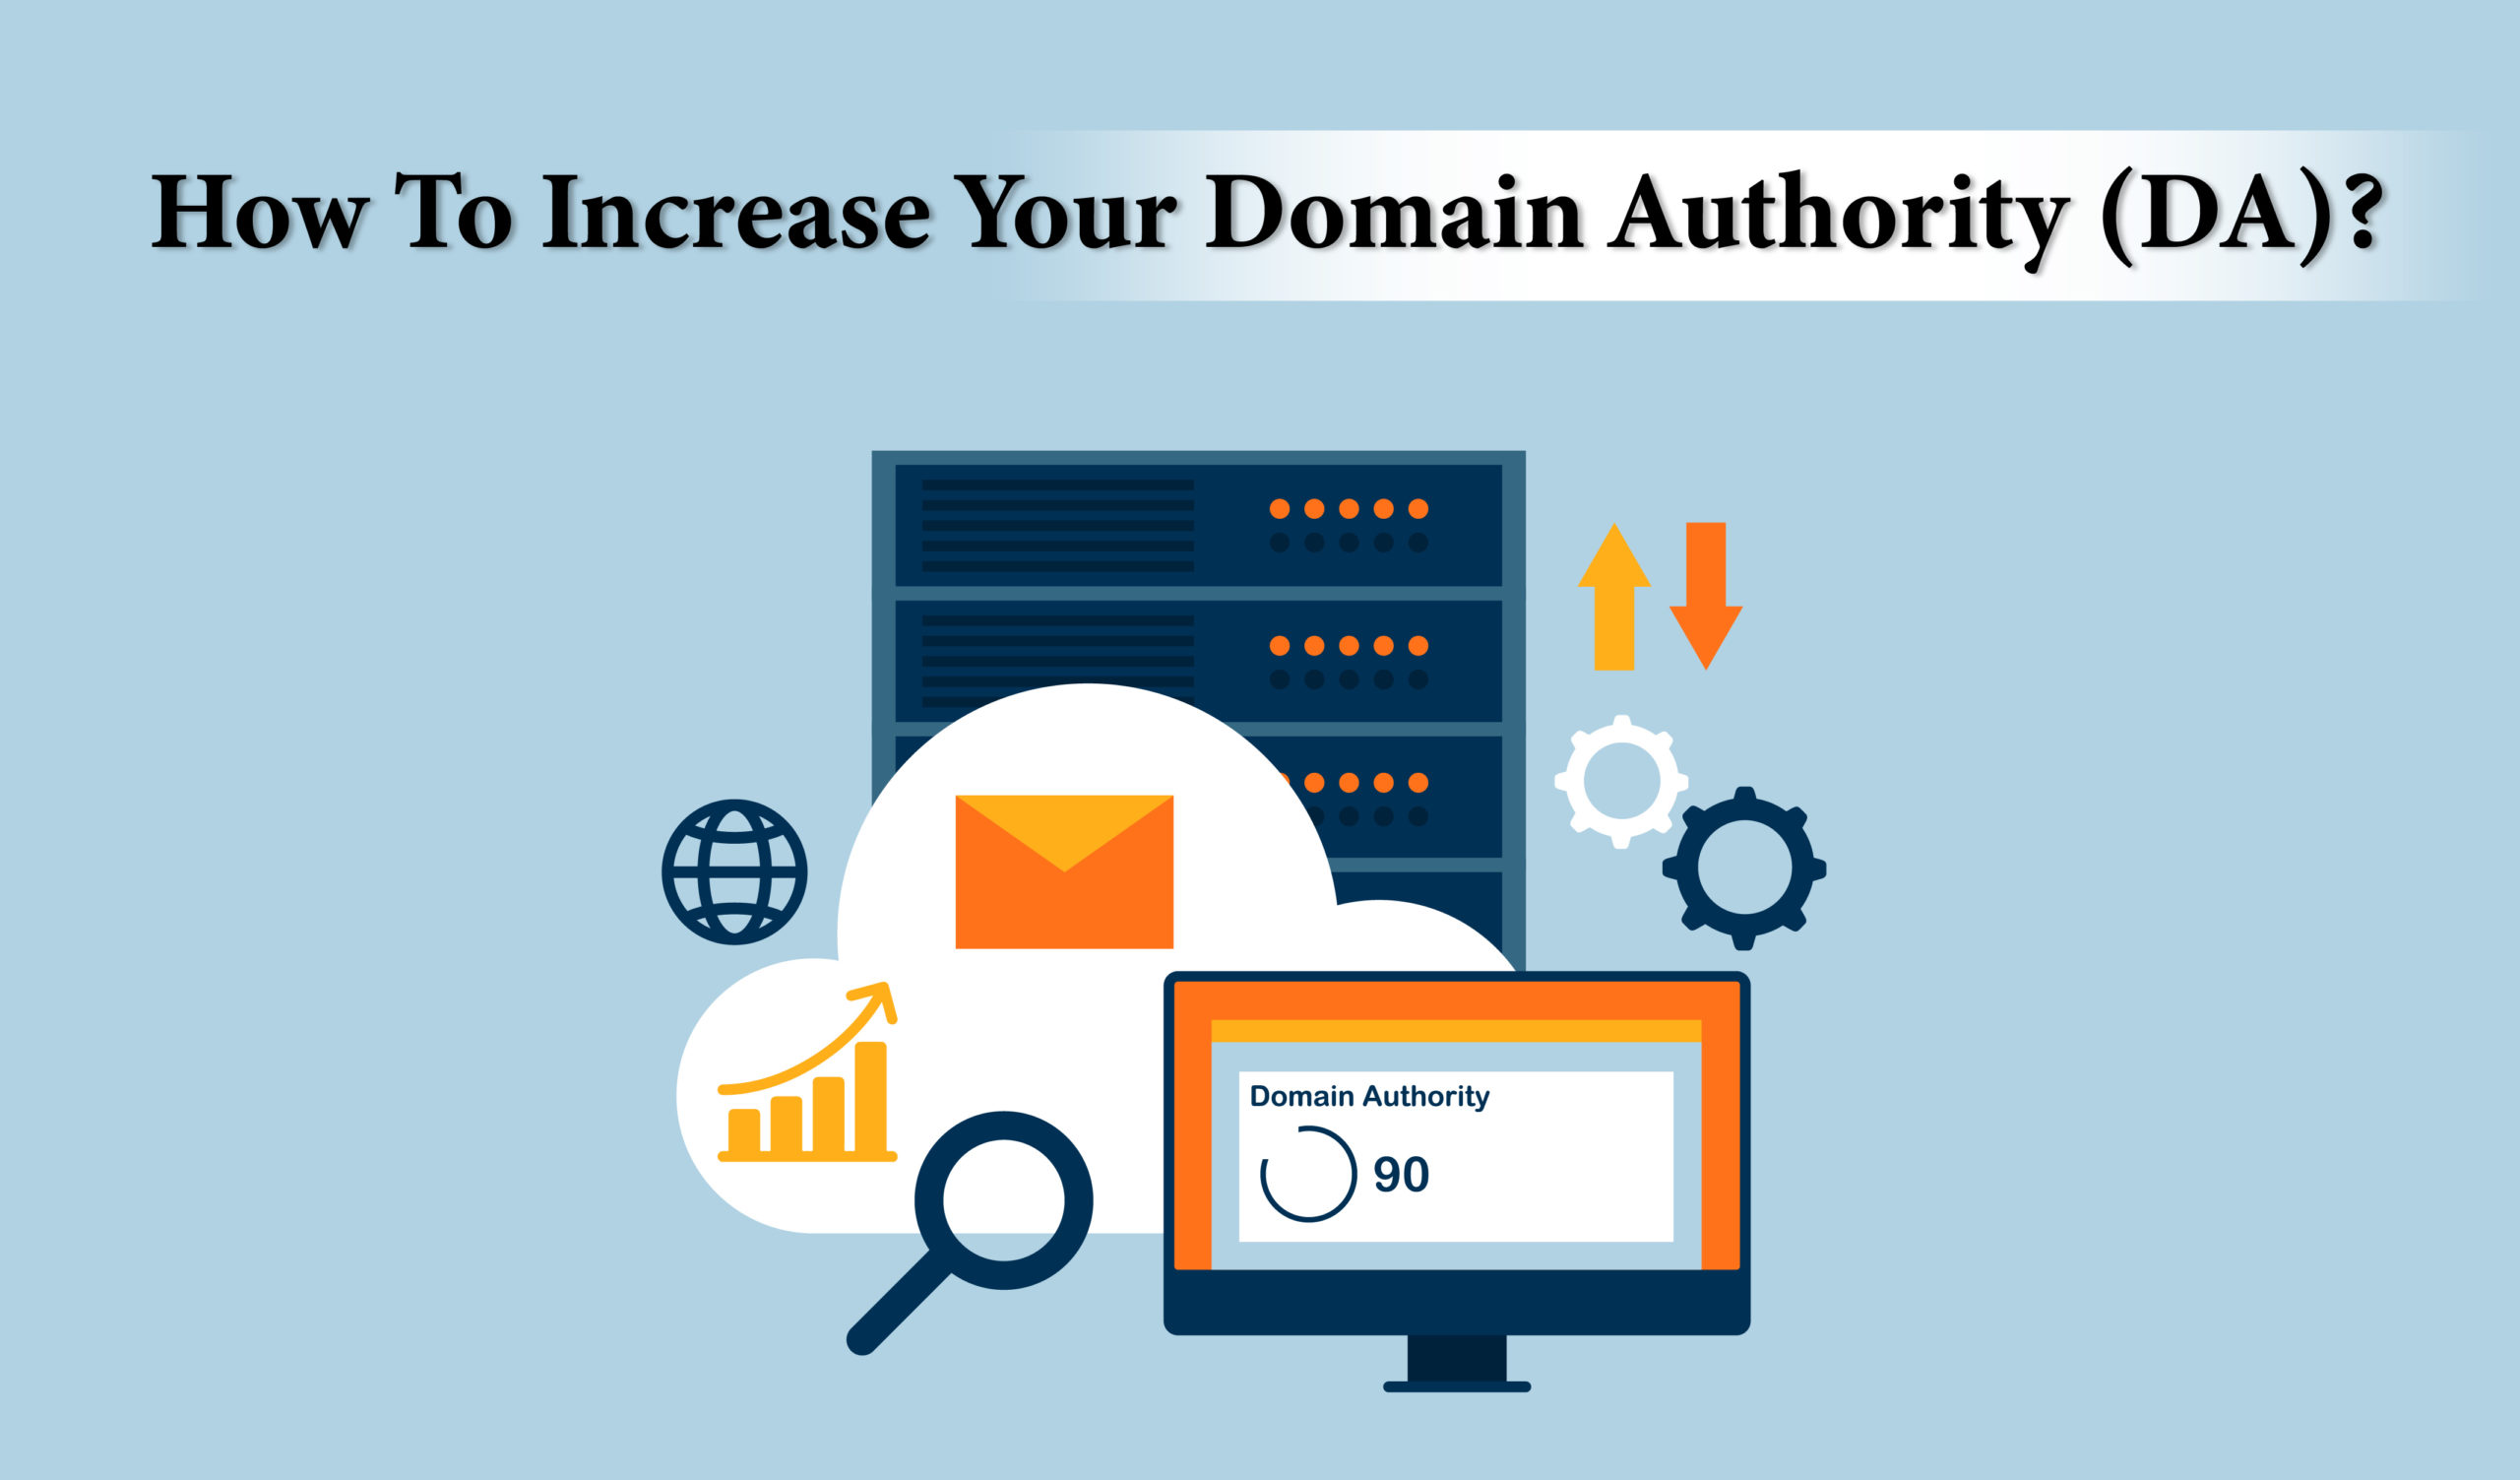 How to increase your Domain Authority (DA)?